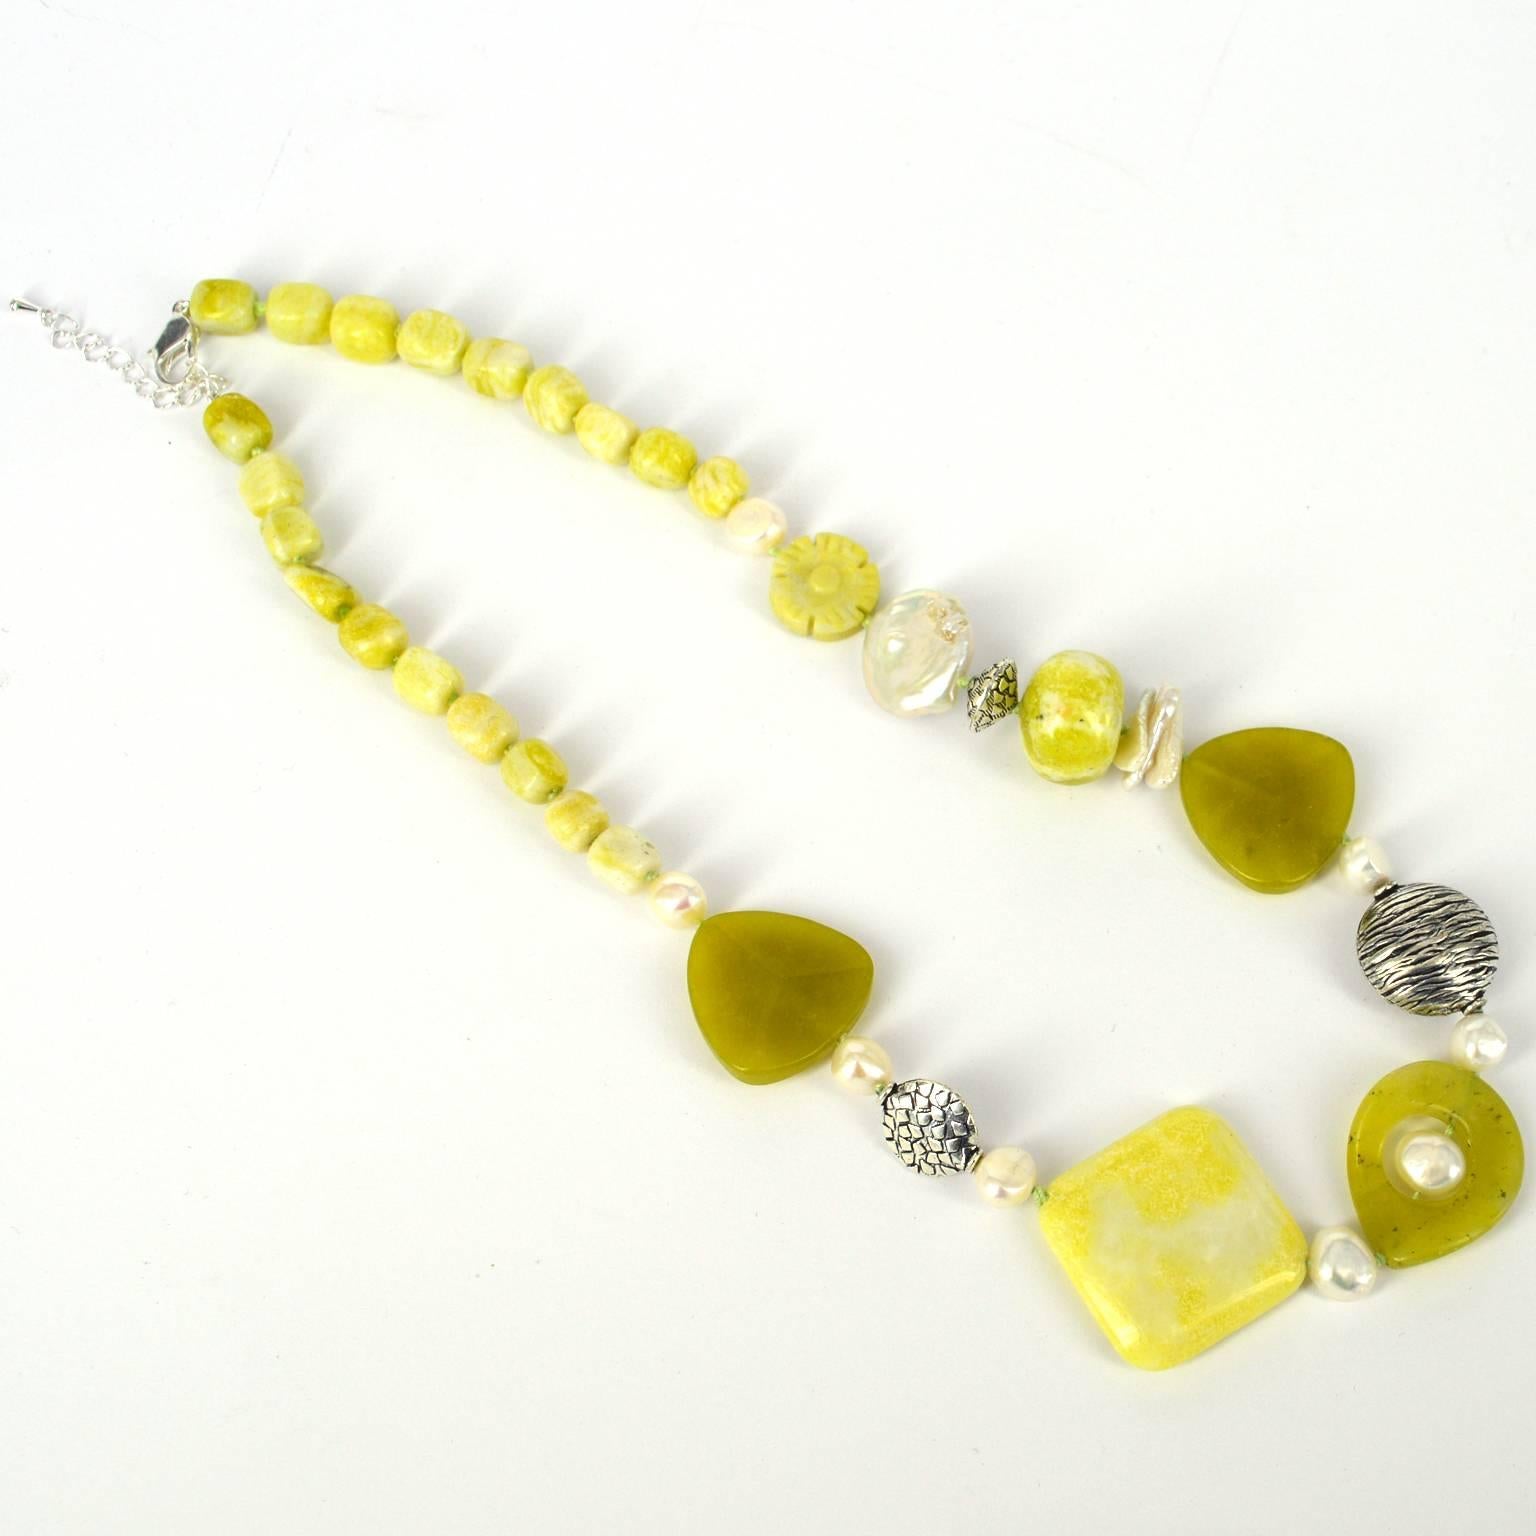 Korean, olive green stone, and Lemon Jade mixed with Fresh Water Pearls and Silver plate beads and Clasp. The largest diamond shape Lemon Jade bead is 30x30mm. 
Knotted on matching lime coloured thread with and extension chain this necklace can be